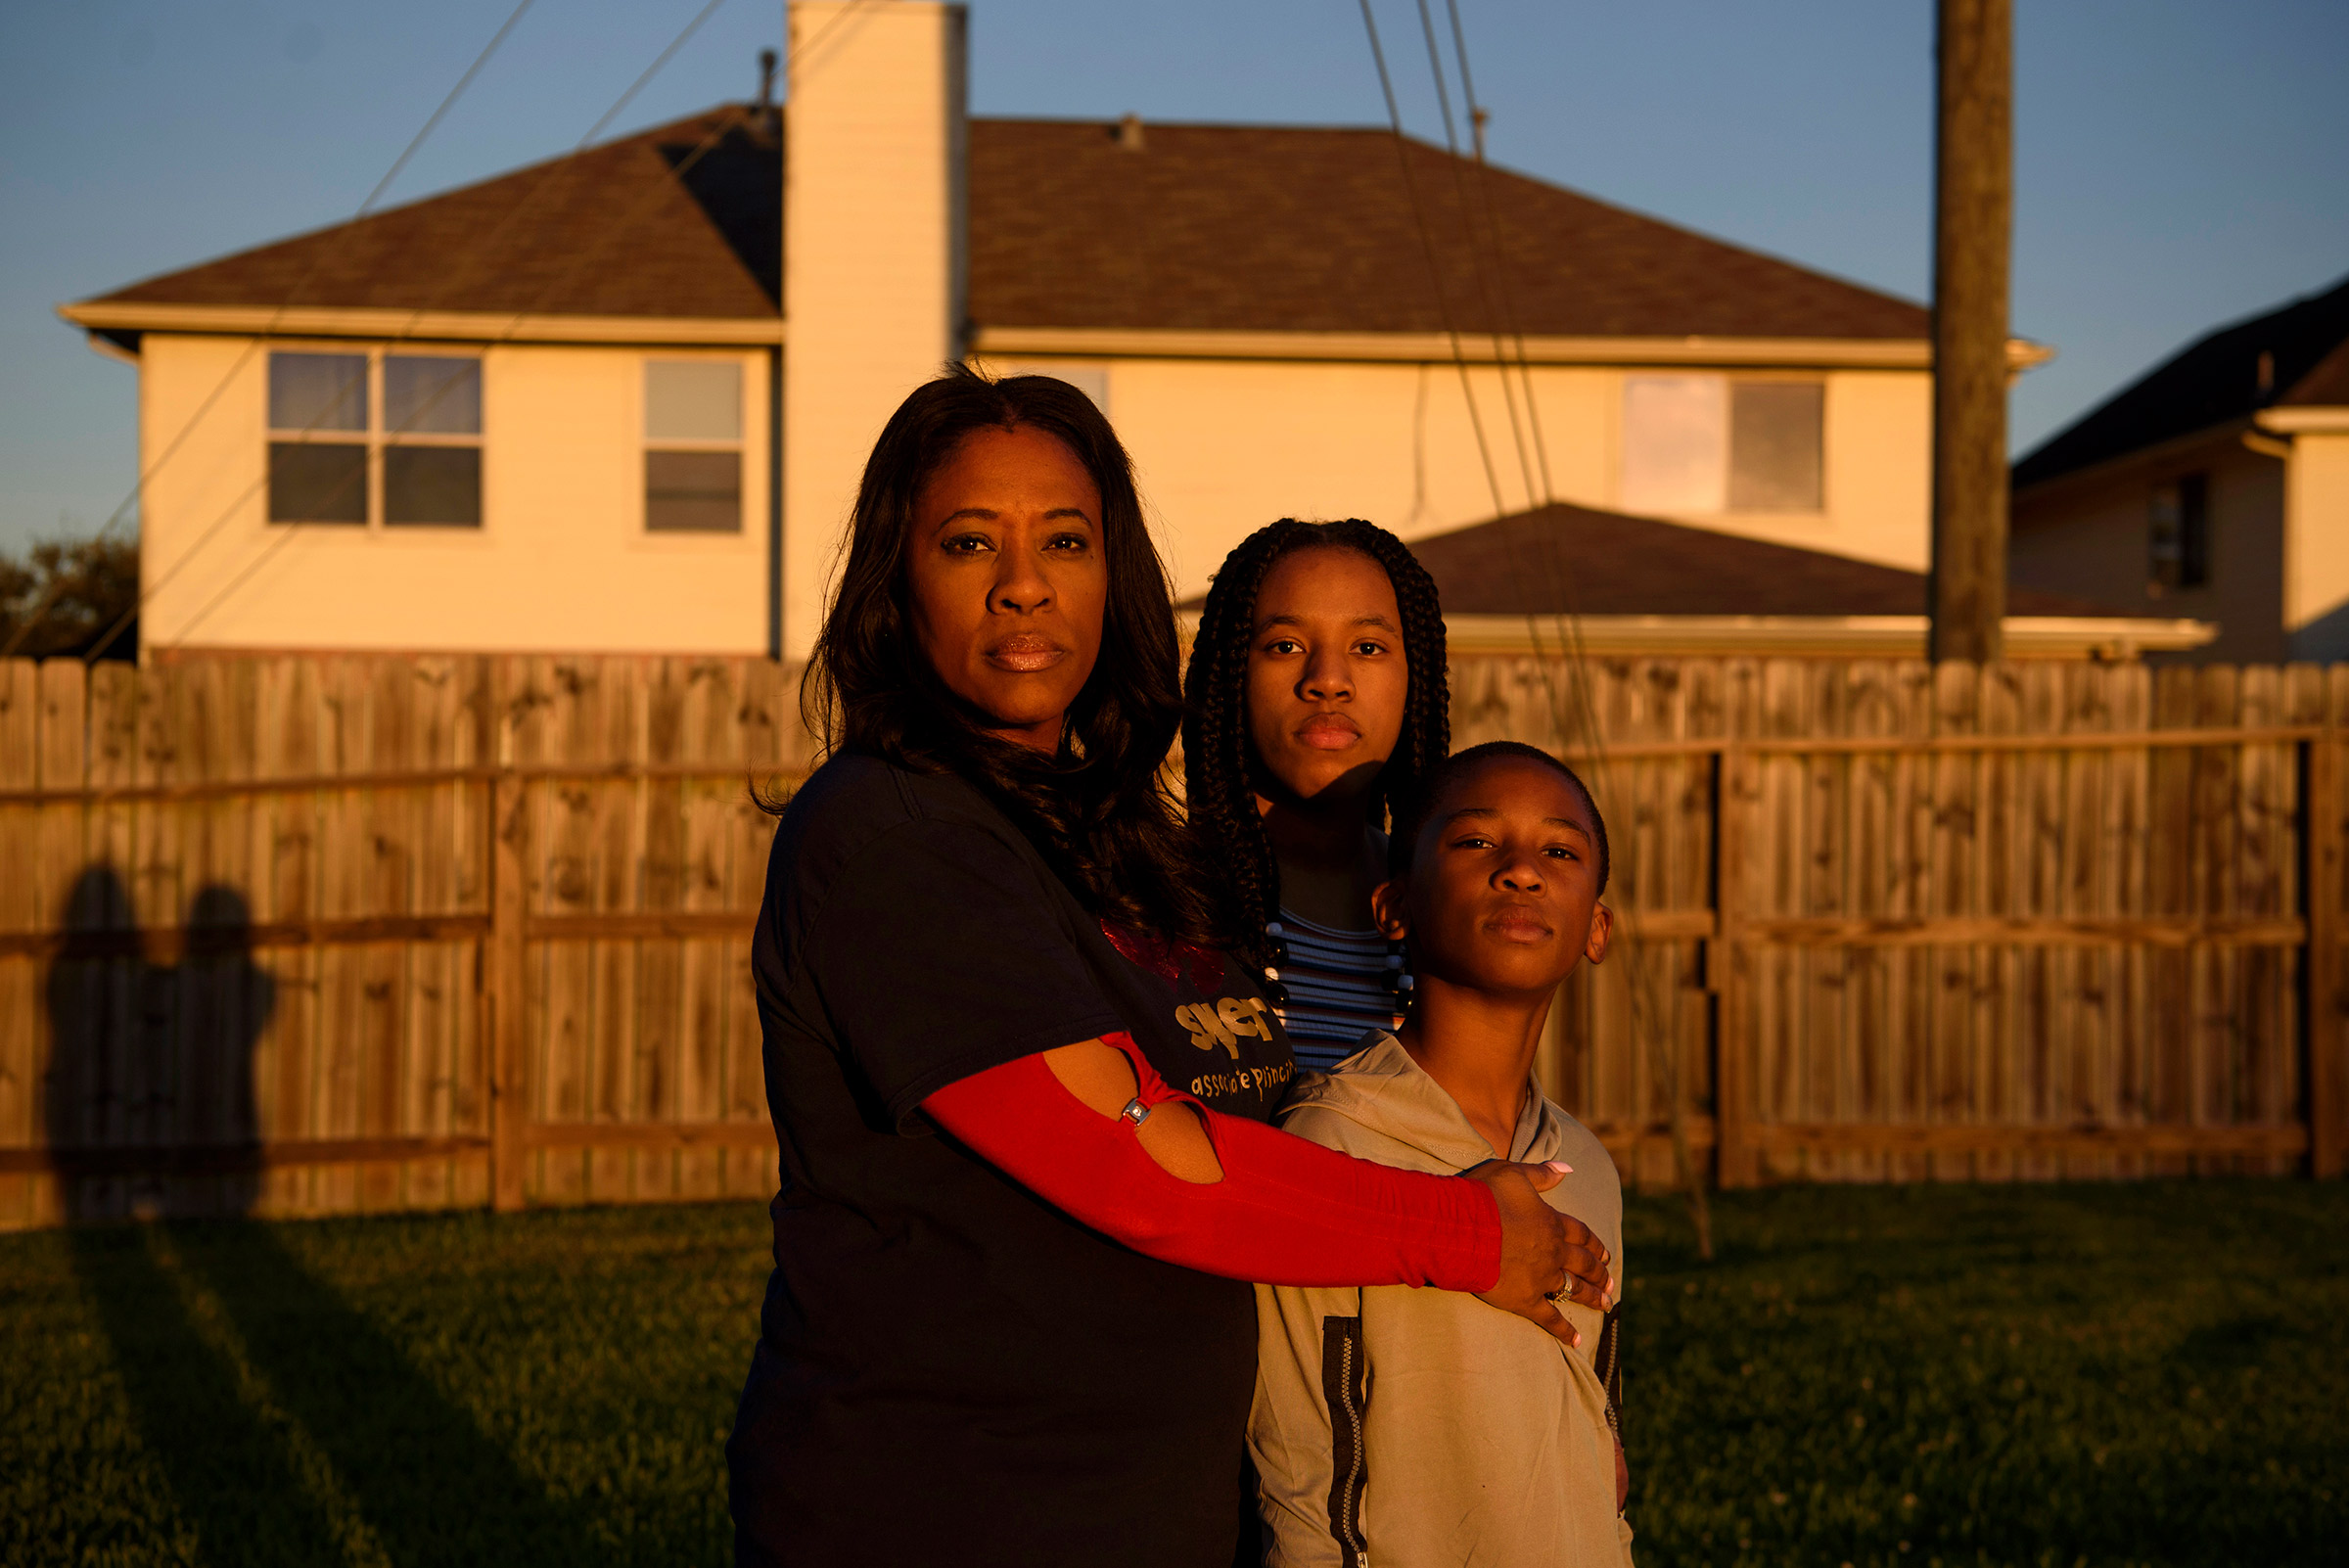 Ebony James, 50, poses with Adin, 8, and  Madison, 16, at home in Fresno, Texas. In February, her husband, Terrence James, died from COVID-19 related illness. (Callaghan O'Hare for TIME)